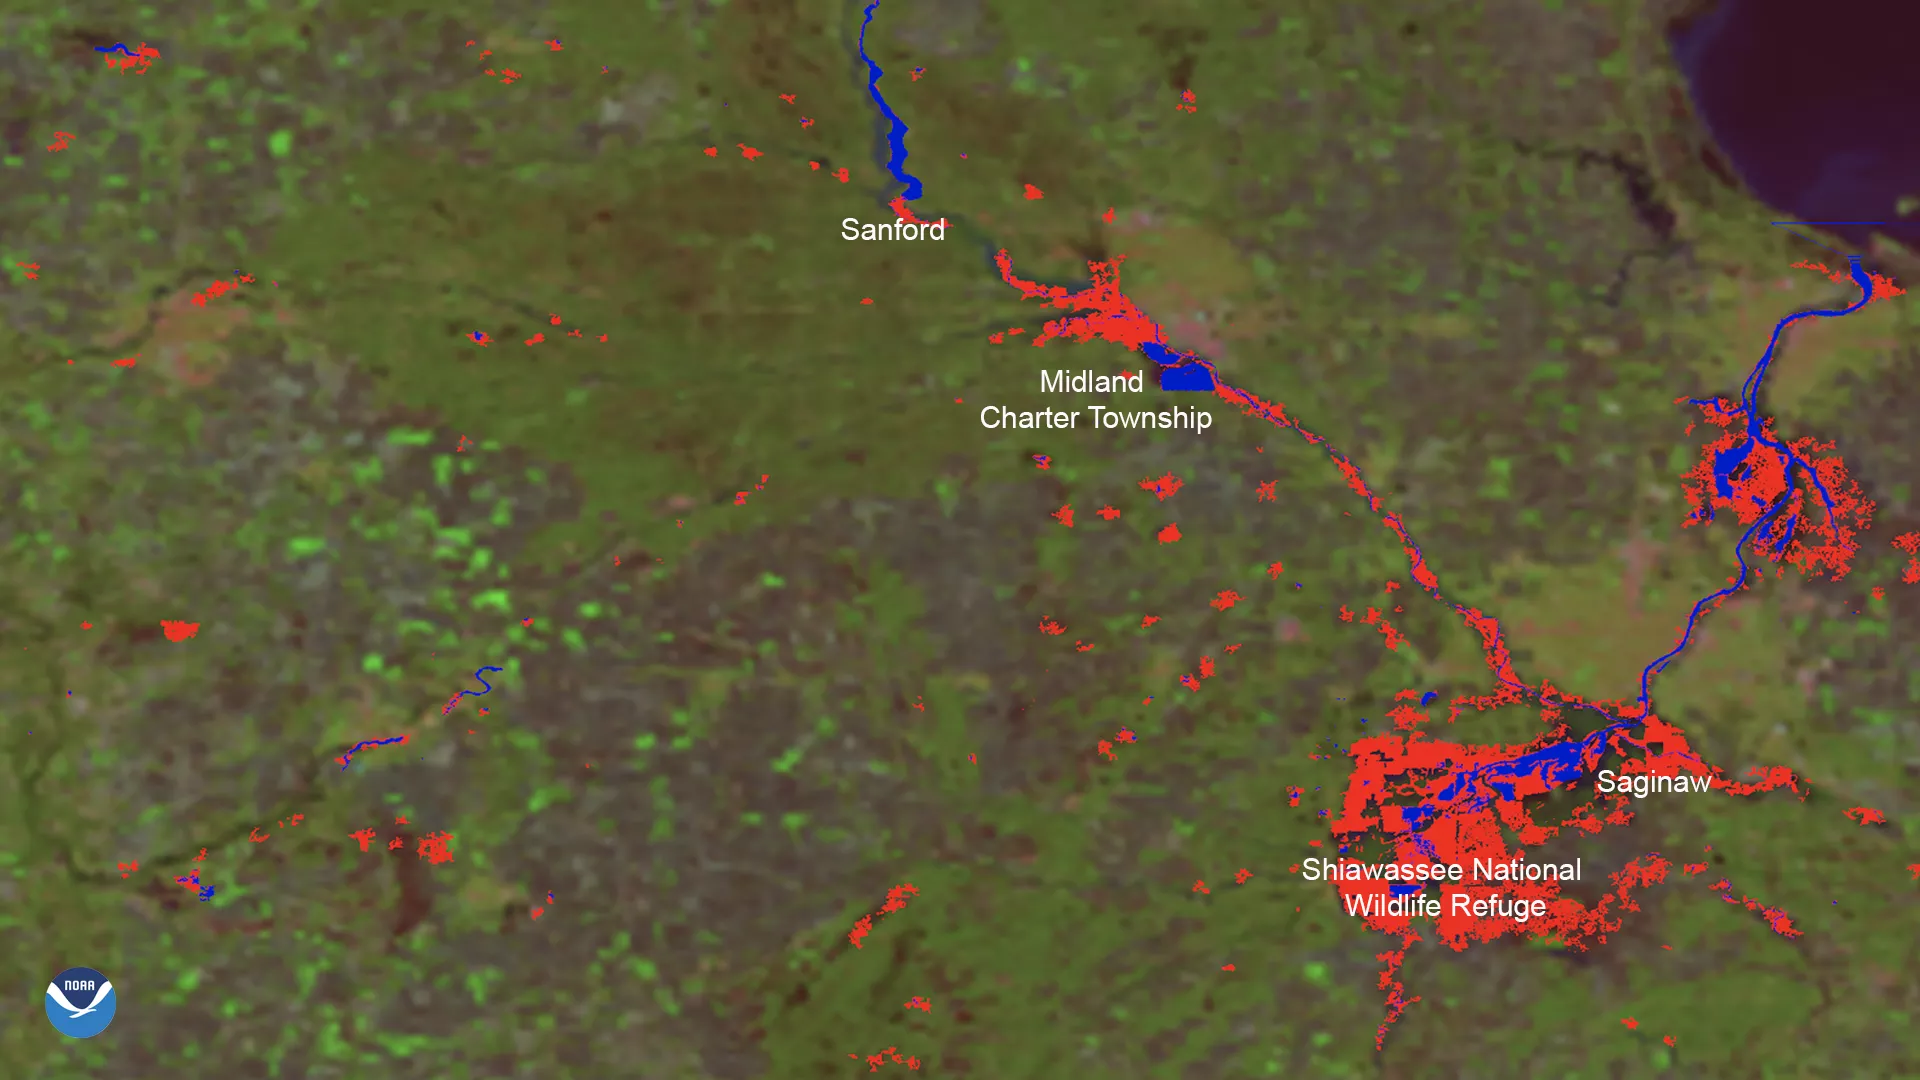 Flooding imagery of Midland, Mich. tracing out flooded areas in red and orange. 